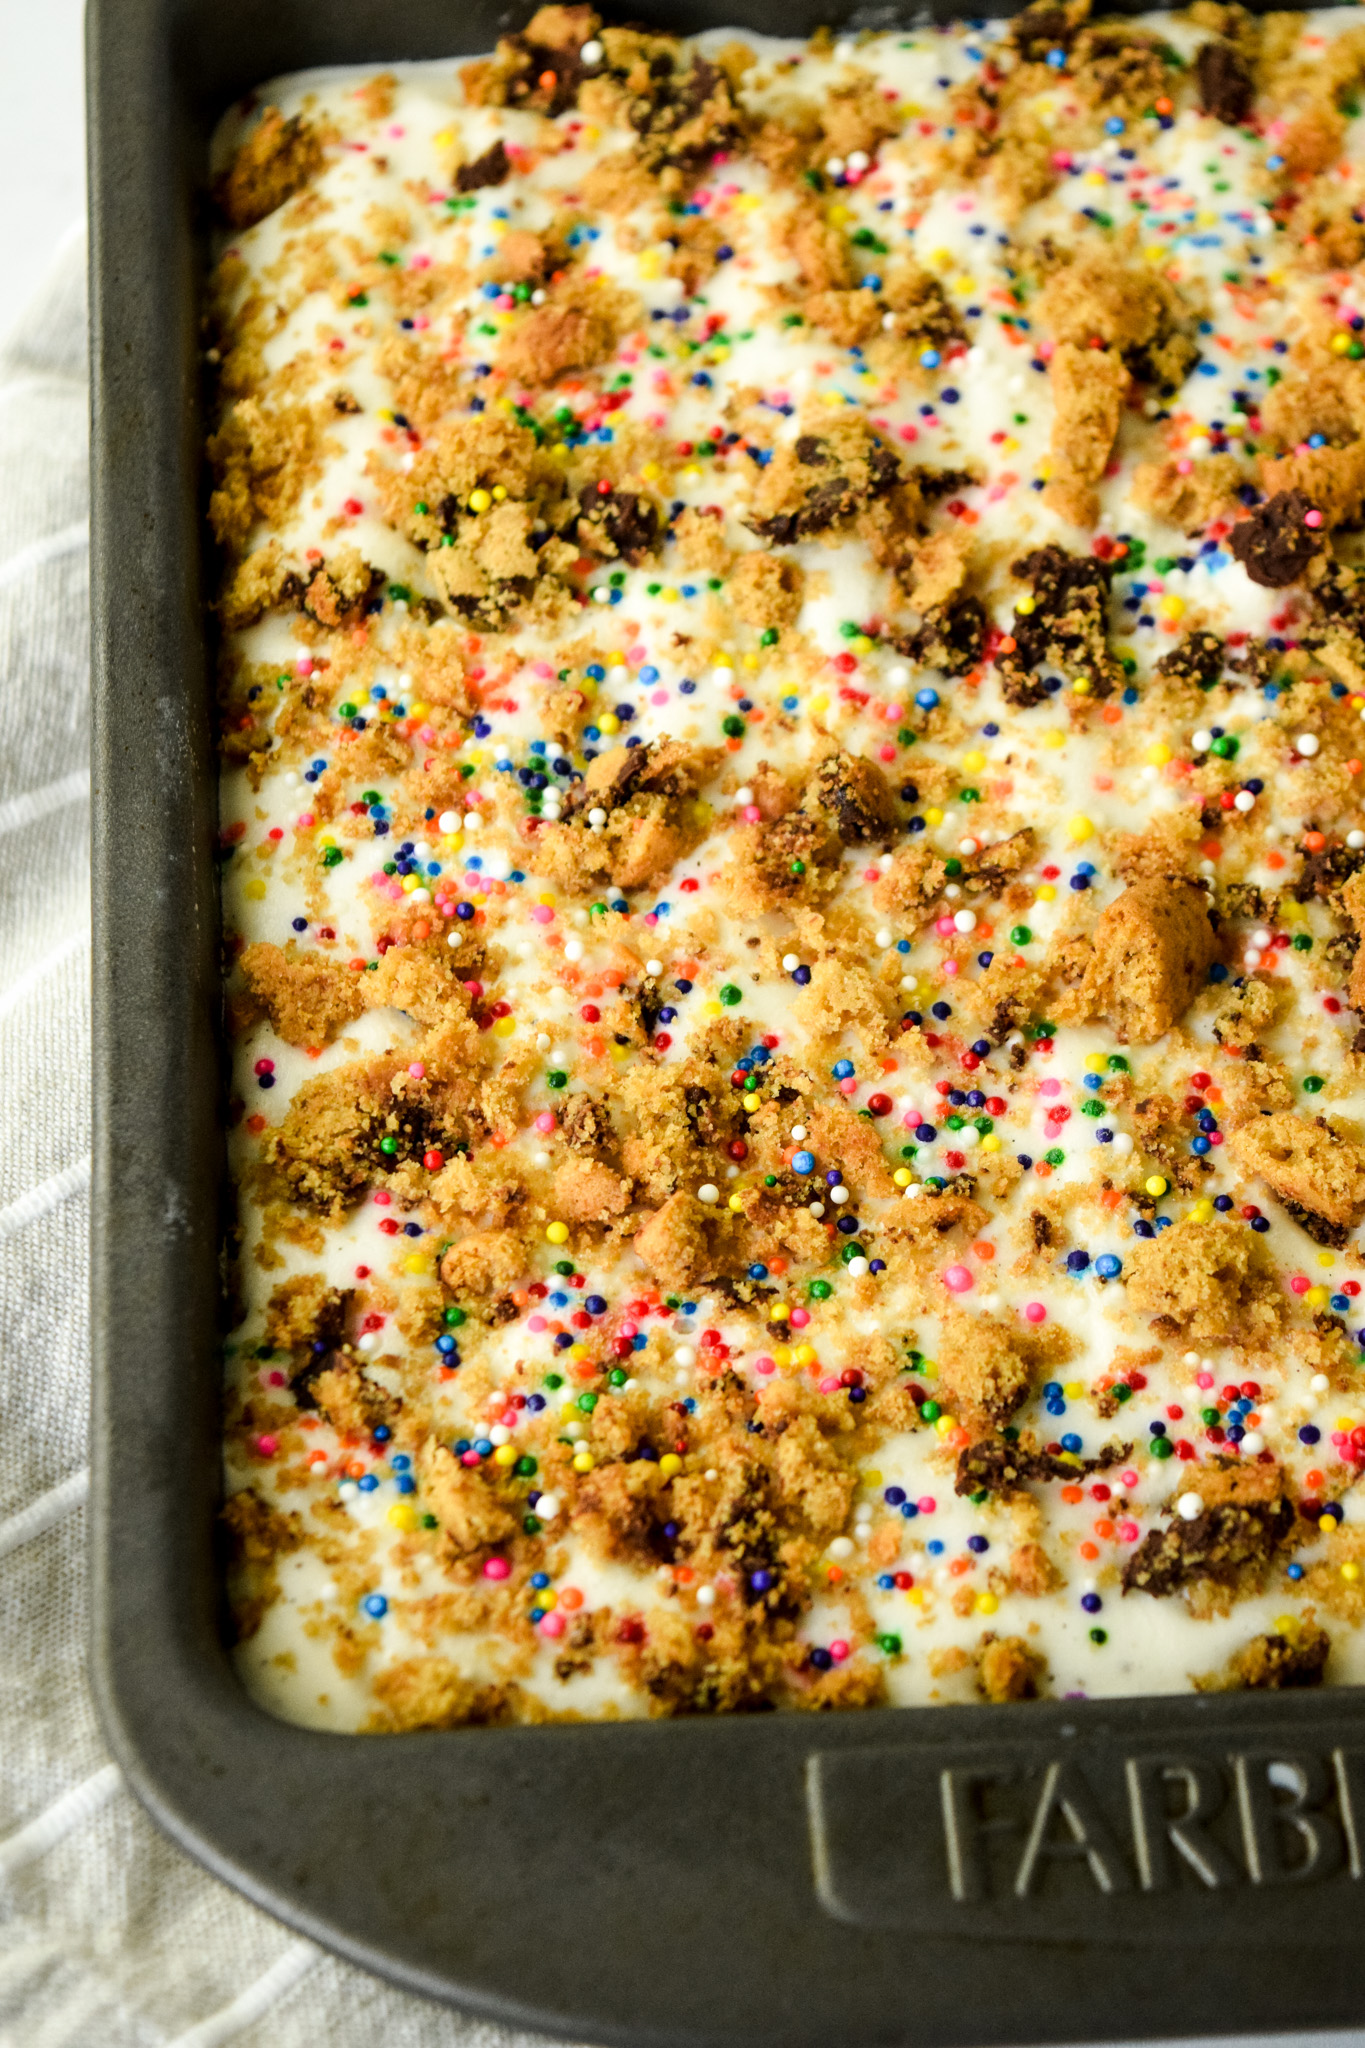 Gluten Free Chocolate Chip Cookie Cake with Cookie Crumbles and Rainbow Sprinkles